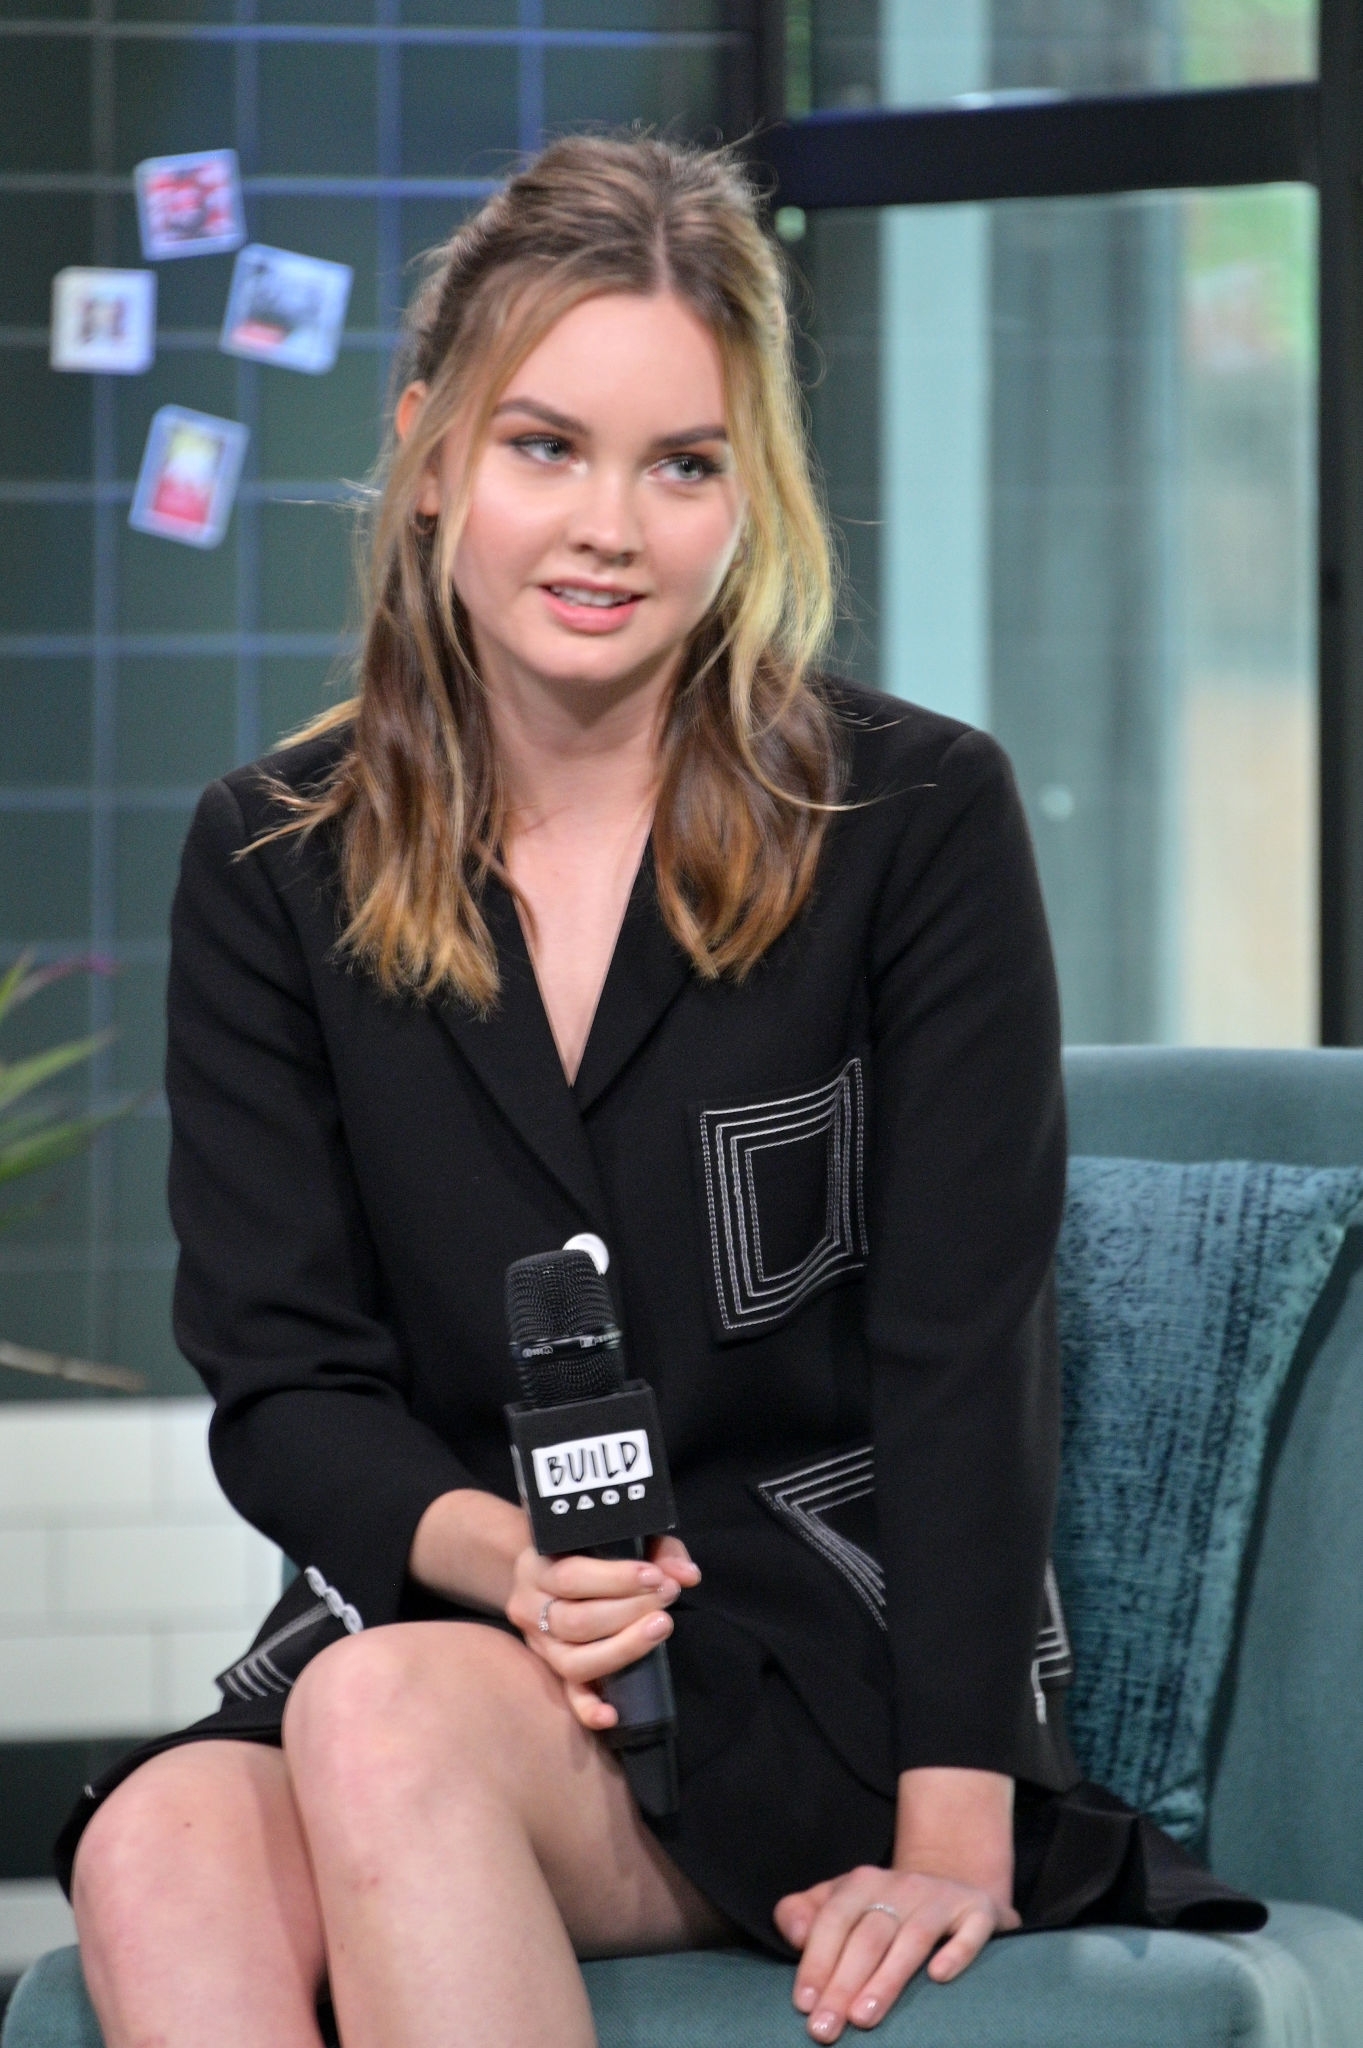 Liana Liberato â€“ Visit Build To Discuss The Series â€˜Light As A Featherâ€™ In NYC